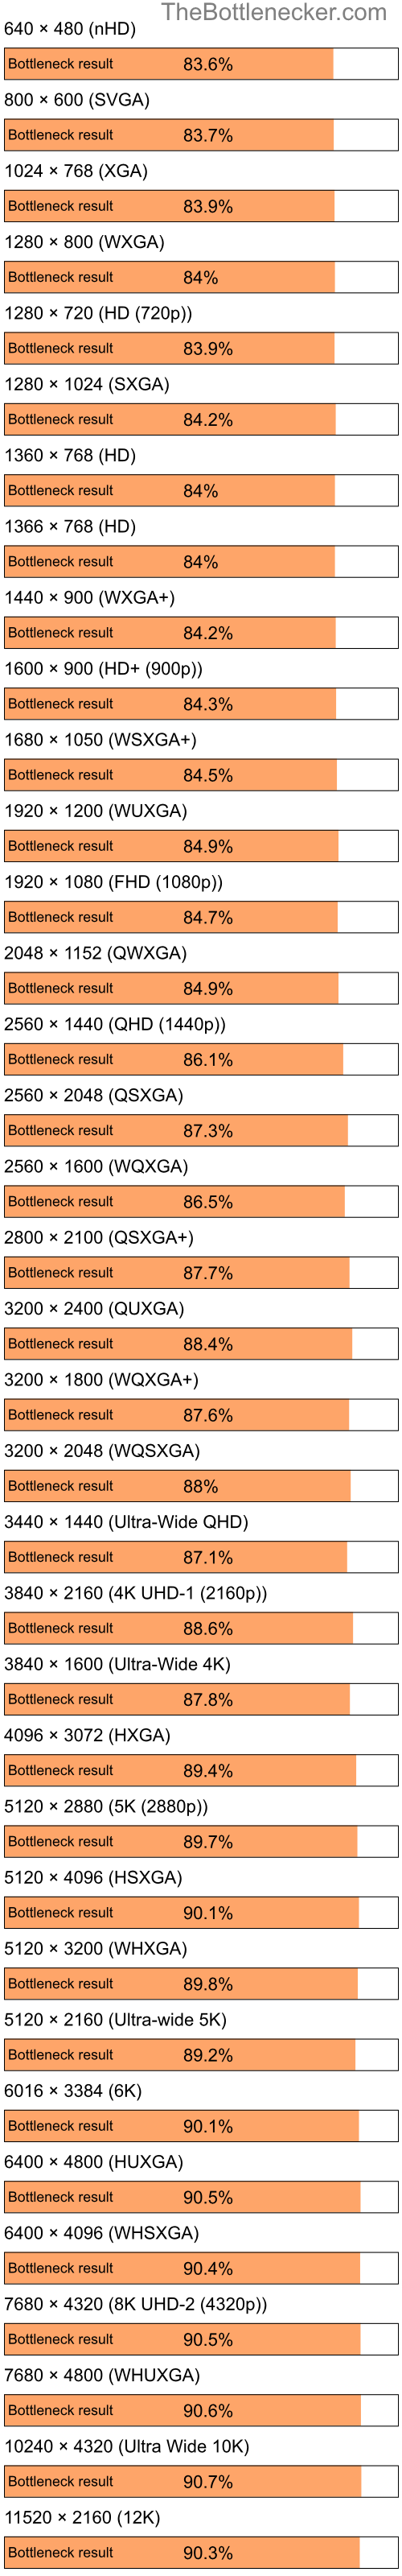 Bottleneck results by resolution for Intel Celeron and NVIDIA GeForce FX 5700LE in Graphic Card Intense Tasks